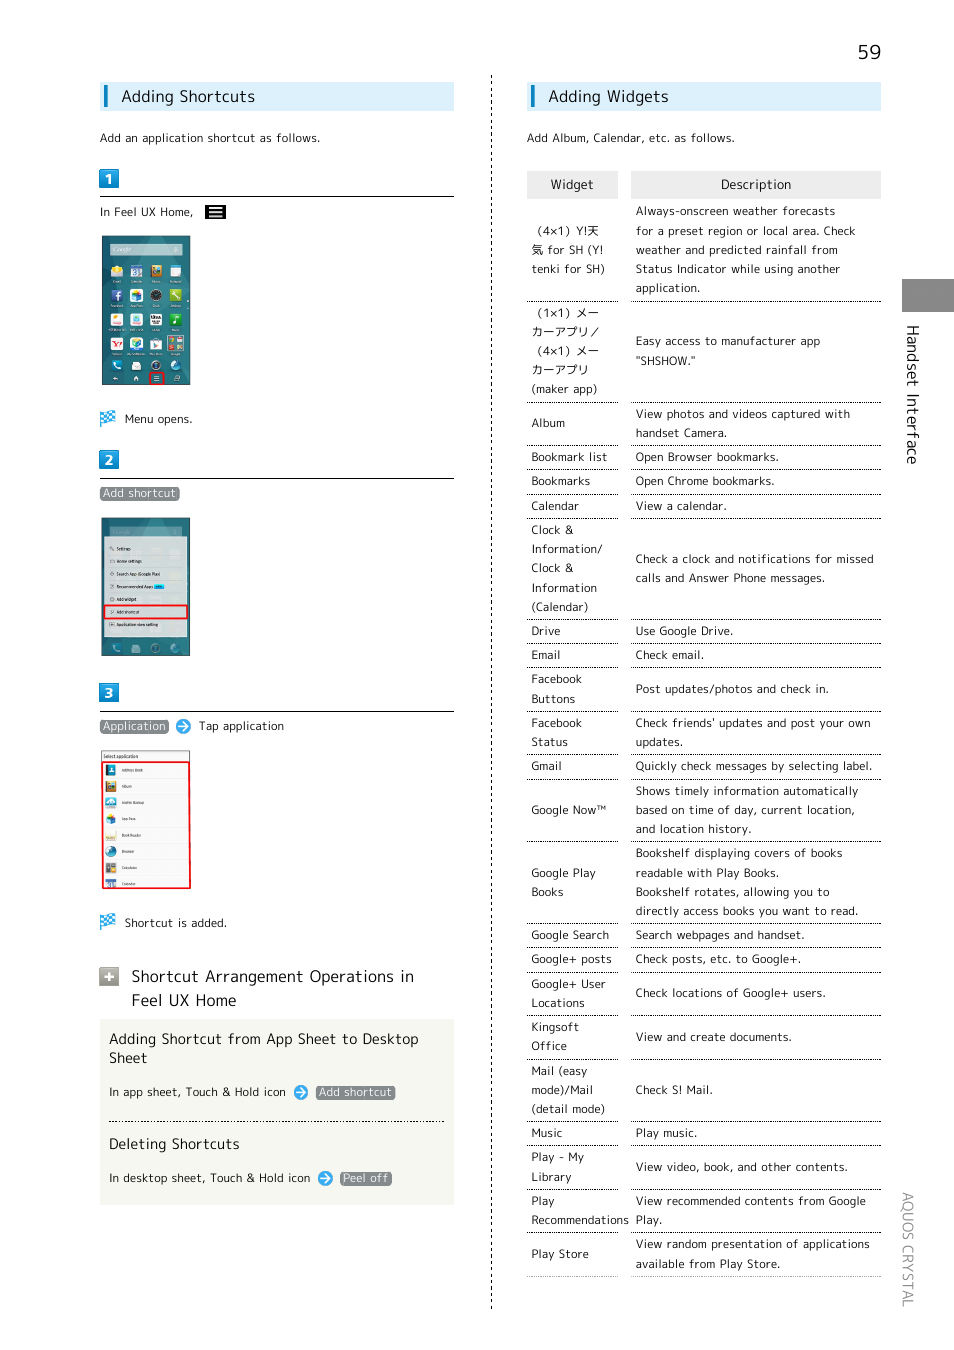 Added. see, Adding shortcuts, Adding widgets | Handset interface, Shortcut arrangement operations in feel ux home | Sharp AQUOS Crystal User Manual | Page 61 / 240